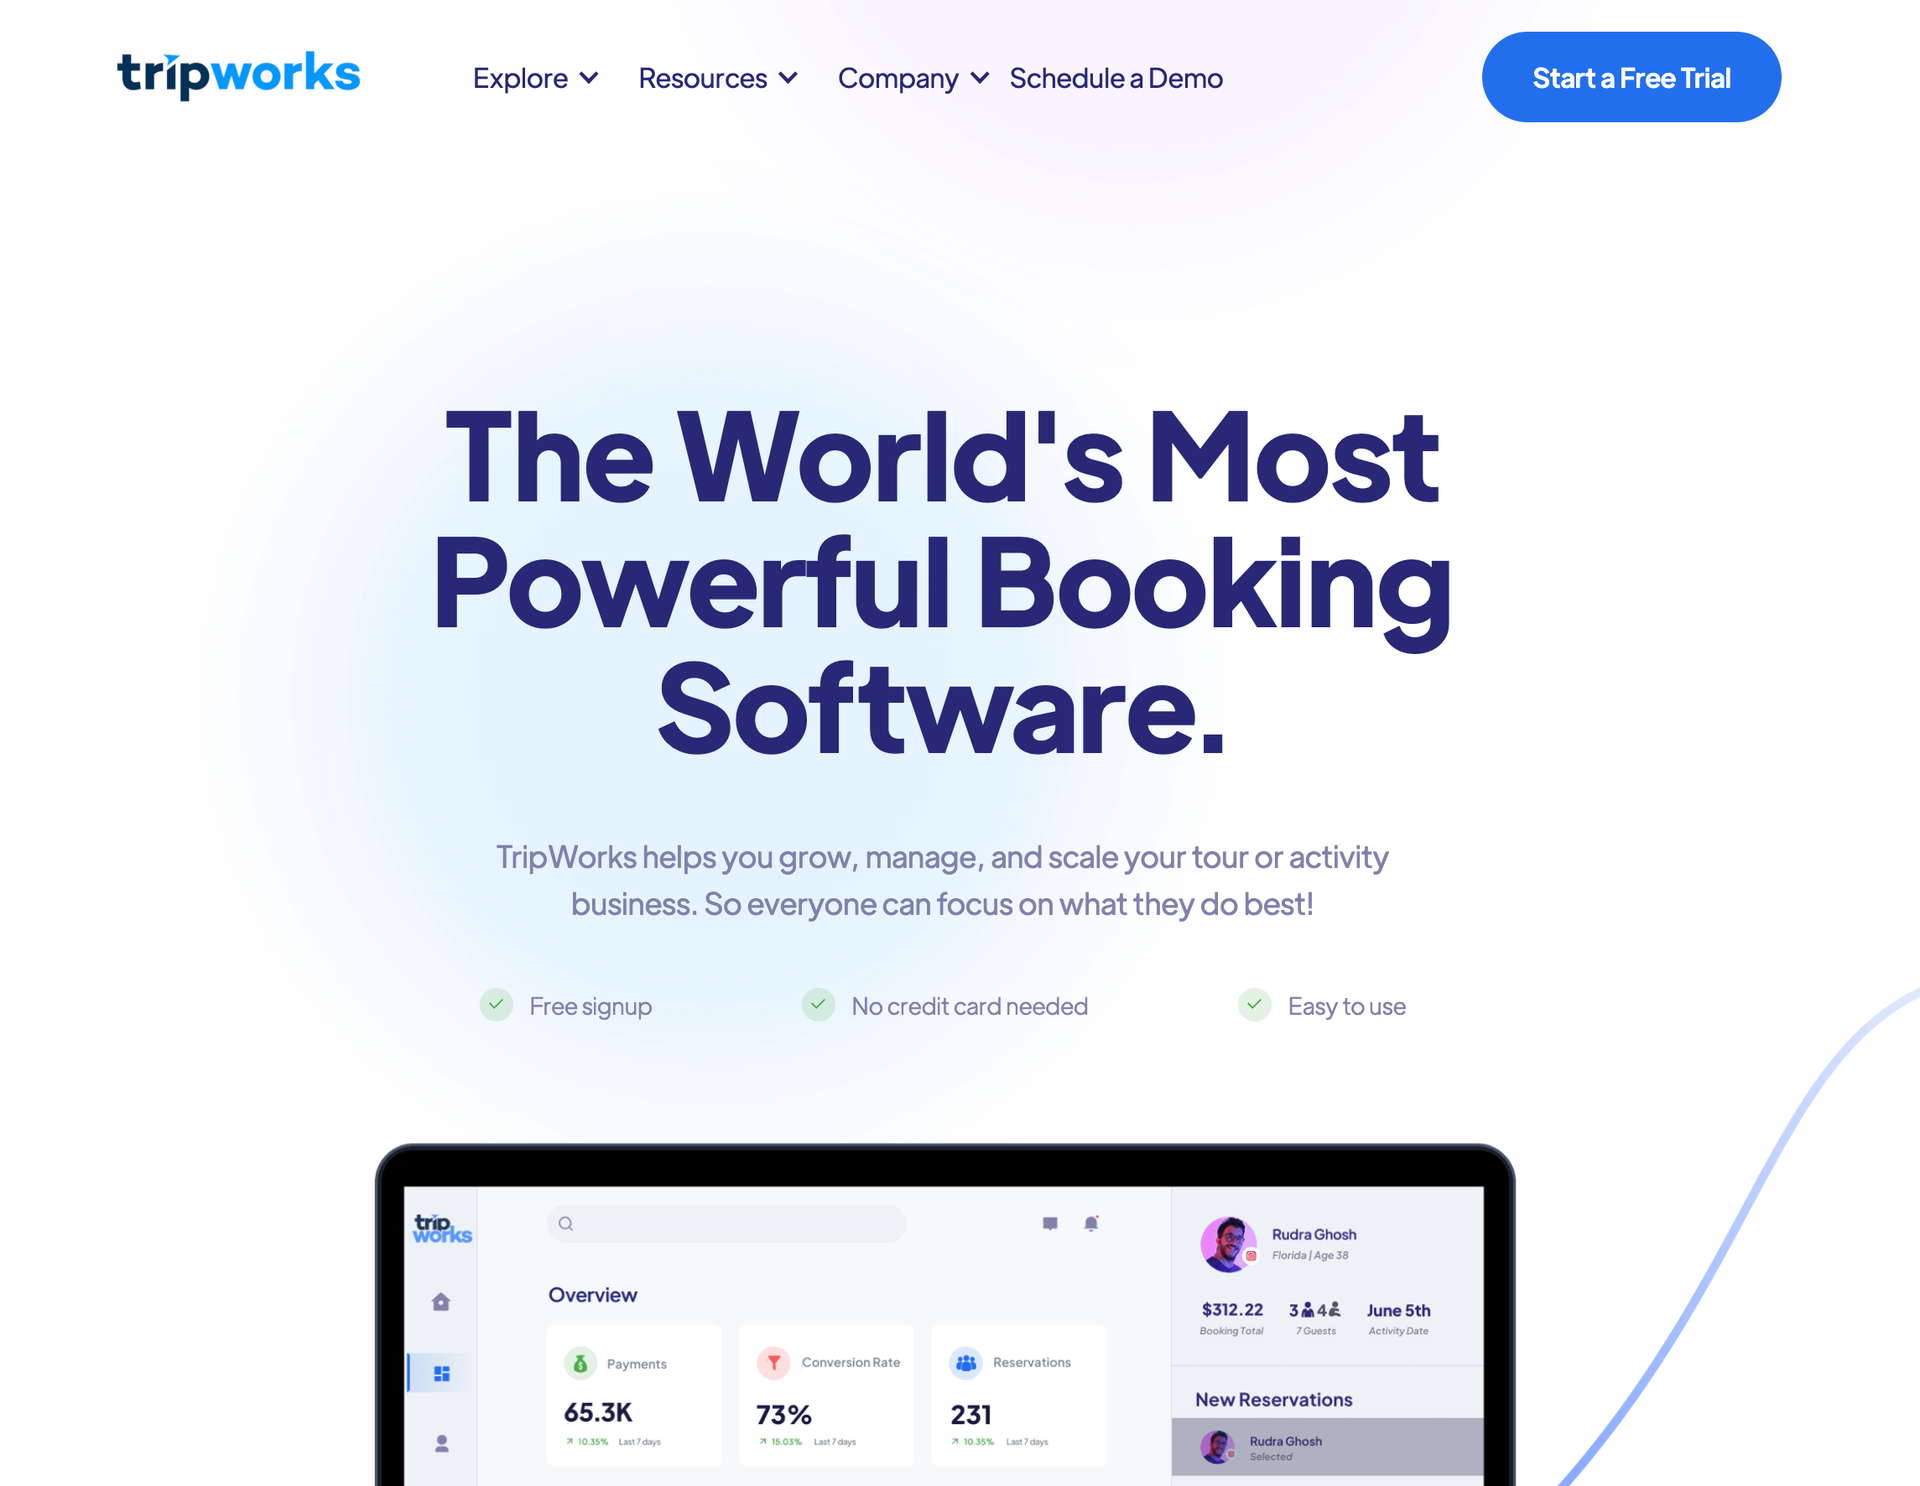 TripWorks homepage: The World's Most Powerful Booking Software